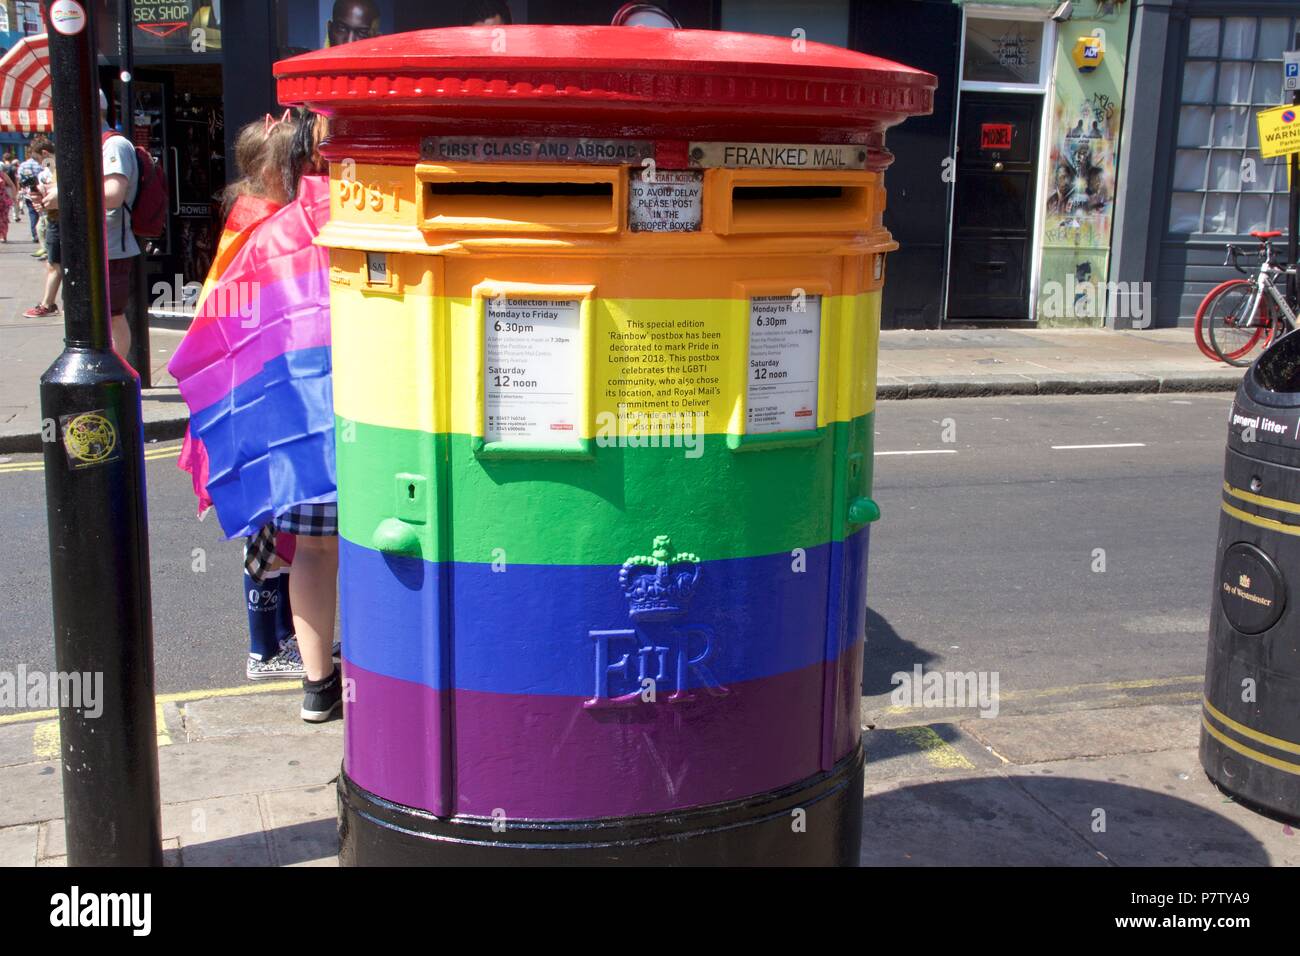 London, UK. 7th July 2018. Pride celebrations in London. A rainbow British postbox on Brewer street, Soho to celebrate Pride in London 2018. It says on it 'This postbox celebrates the LGBTI community, who also chose its location, and the Royal Mail's commitment to Deliver with pride and without discrimination'. Credit: Dimple Patel/Alamy Live News Stock Photo